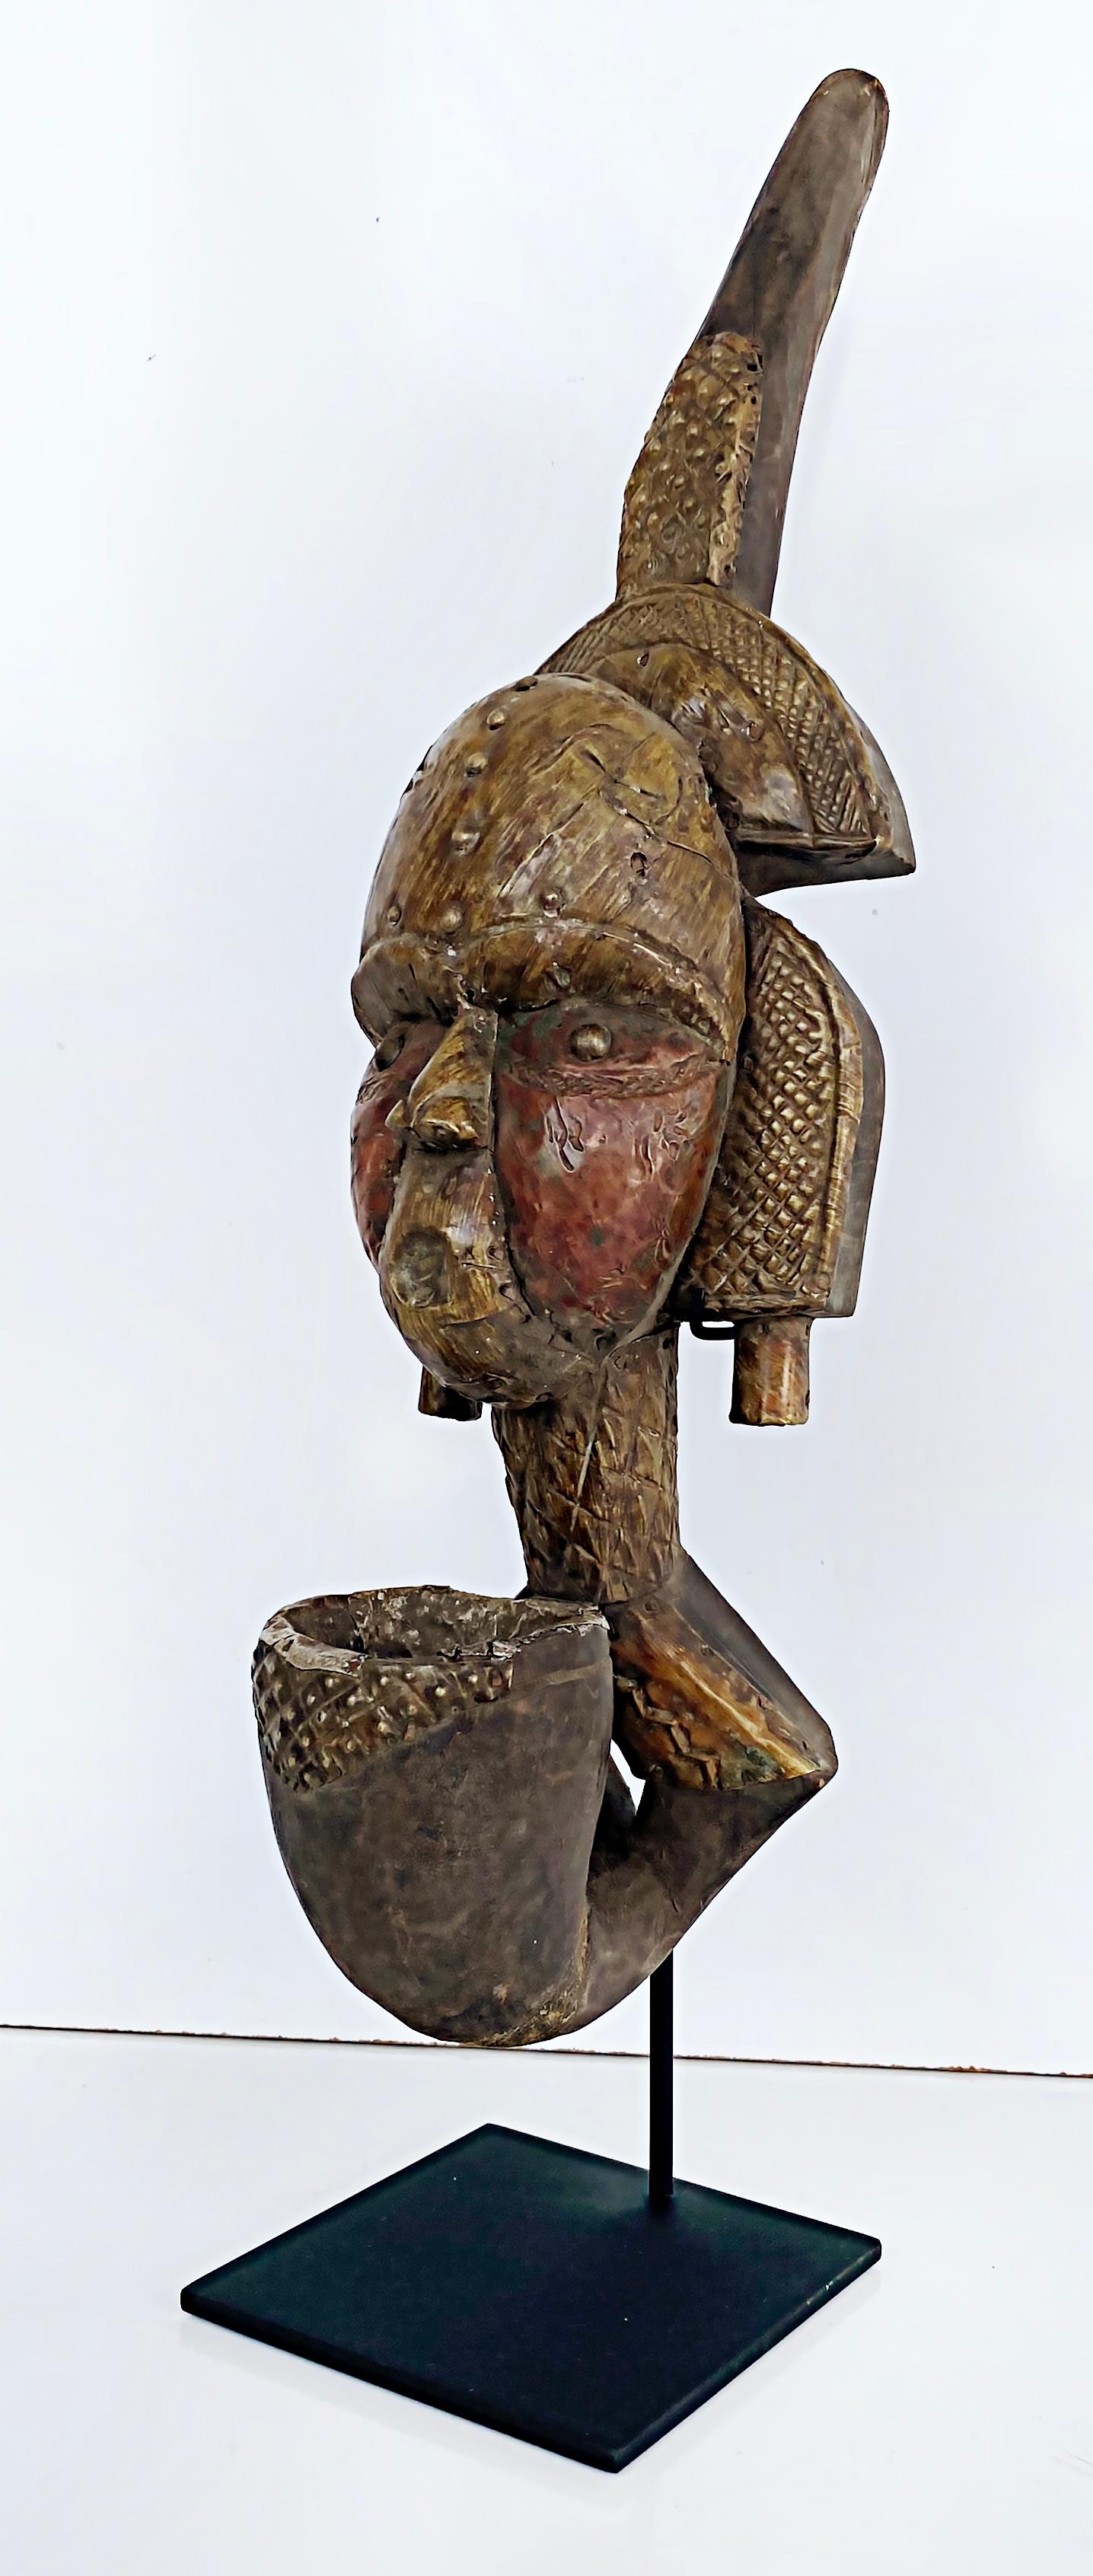 African (Gabon) Kota People of Sebe Valley Reliquary Pipe, 20th century

Offered for sale is an African (Gabon) Kota people of Sebe Vallery carved reliquary pipe dating to the 20th century. This carving is clad in metal and copper with